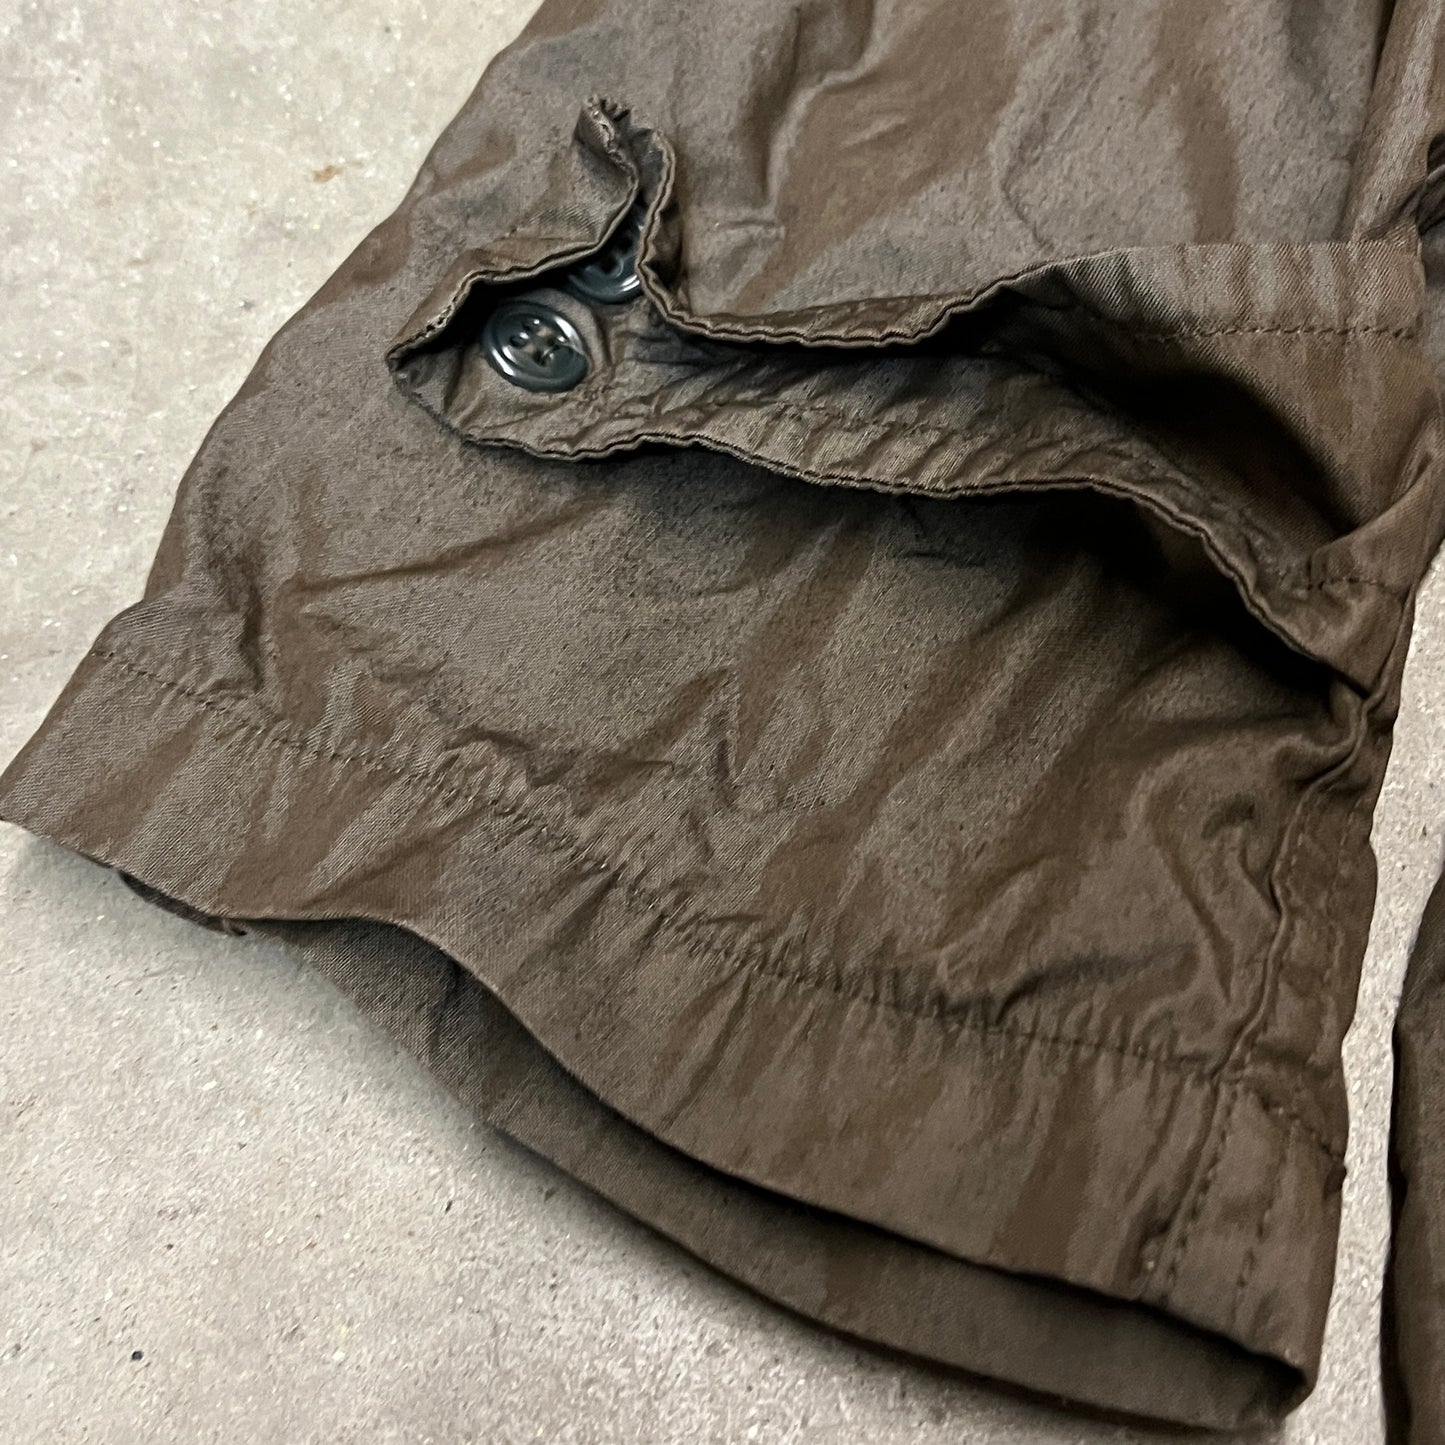 Brown Overdyed US Army Rain Coat